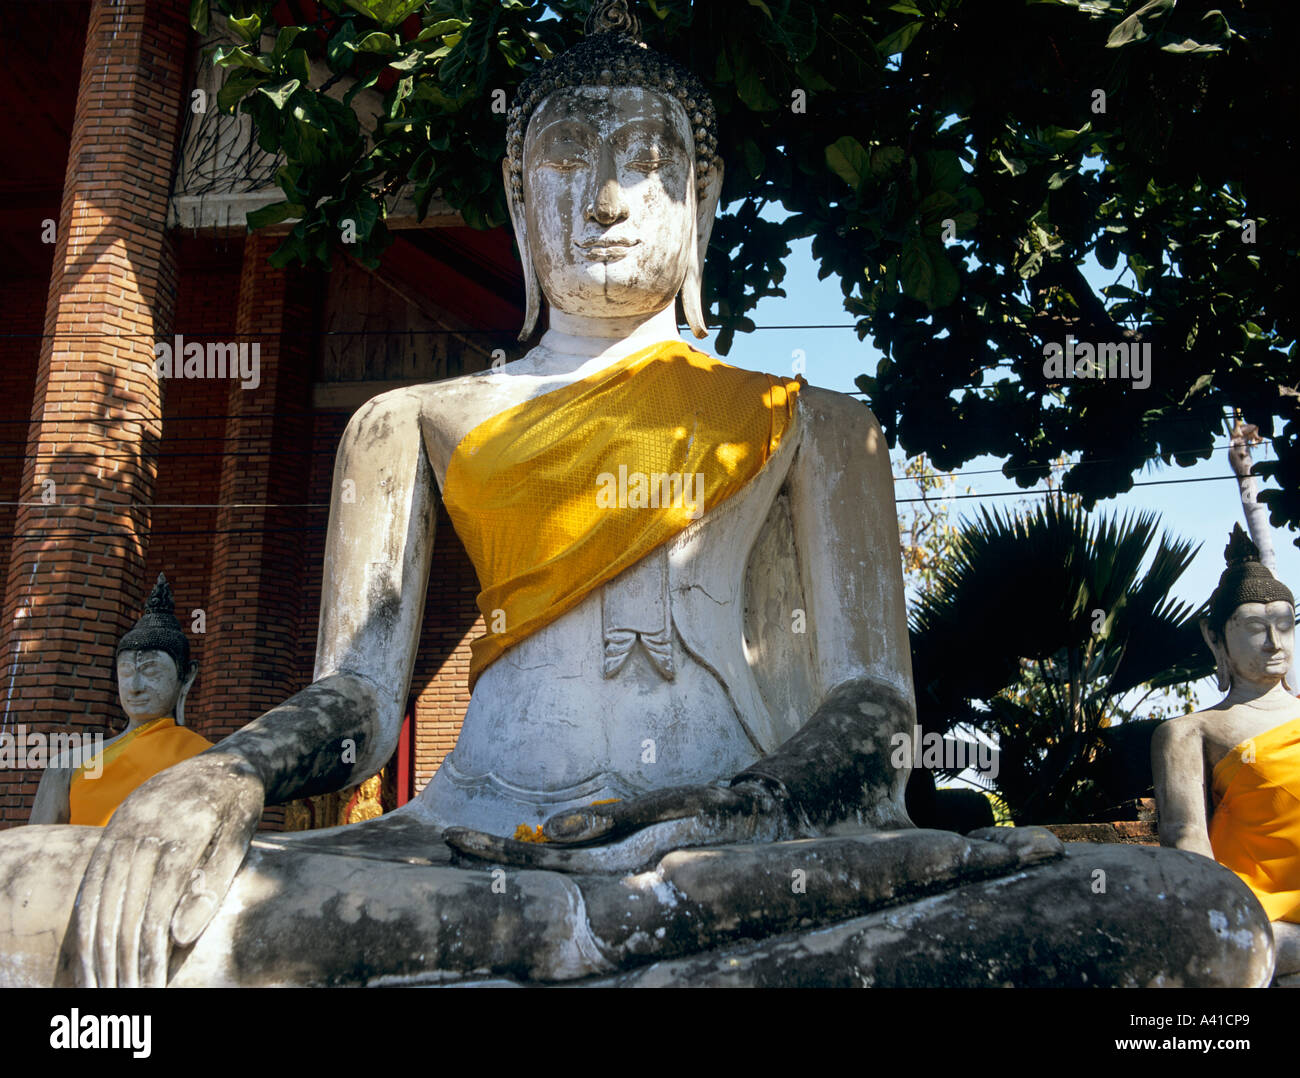 Stone Buddha With Safron Robe The Ancient City Of Ayuthaya Thailand South East Asia Stock Photo